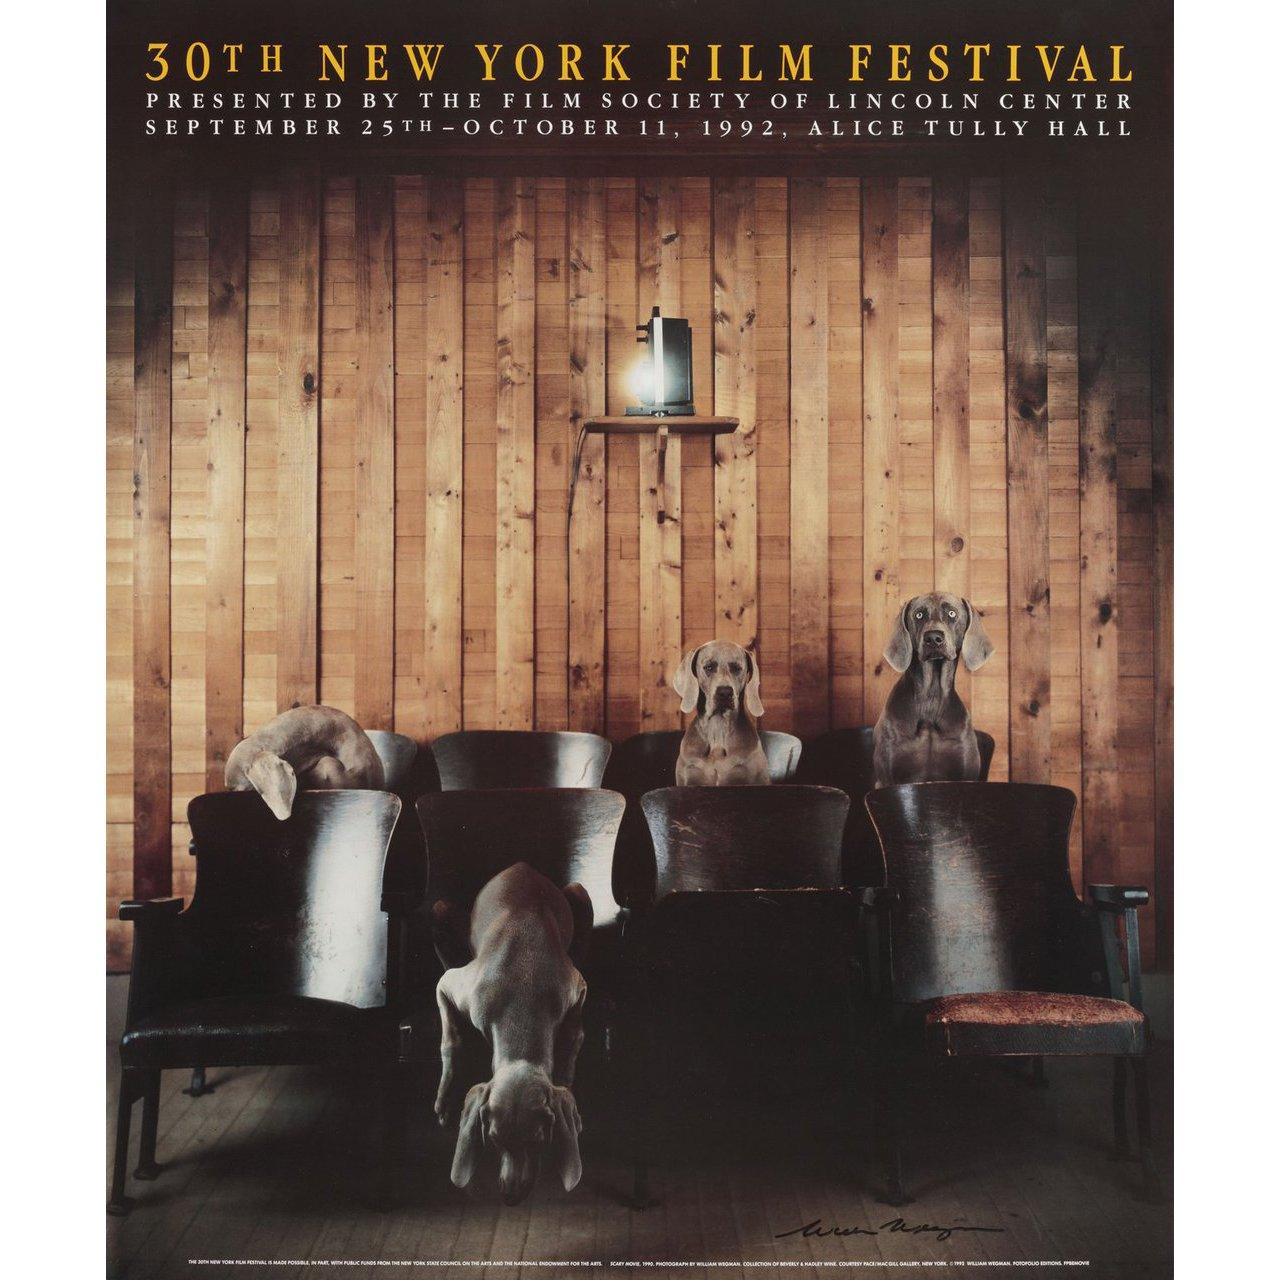 Original 1992 U.S. poster by William Wegman for the 1963 festival New York Film Festival. Signed by William Wegman. Very Good-Fine condition, rolled. Please note: the size is stated in inches and the actual size can vary by an inch or more.